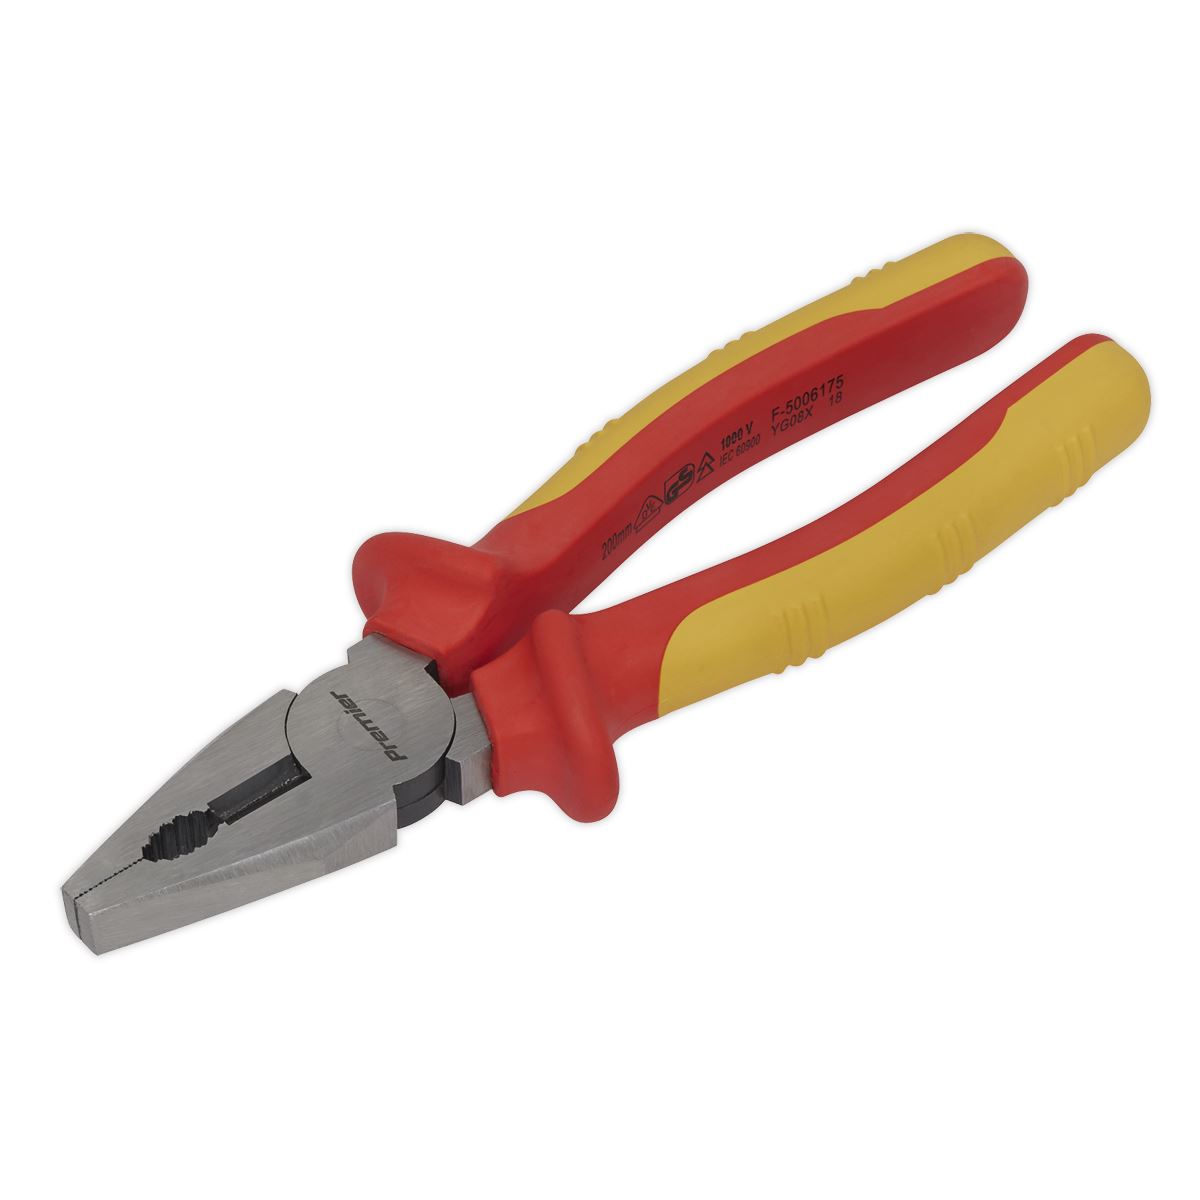 Sealey Premier Combination Pliers 200mm VDE Approved